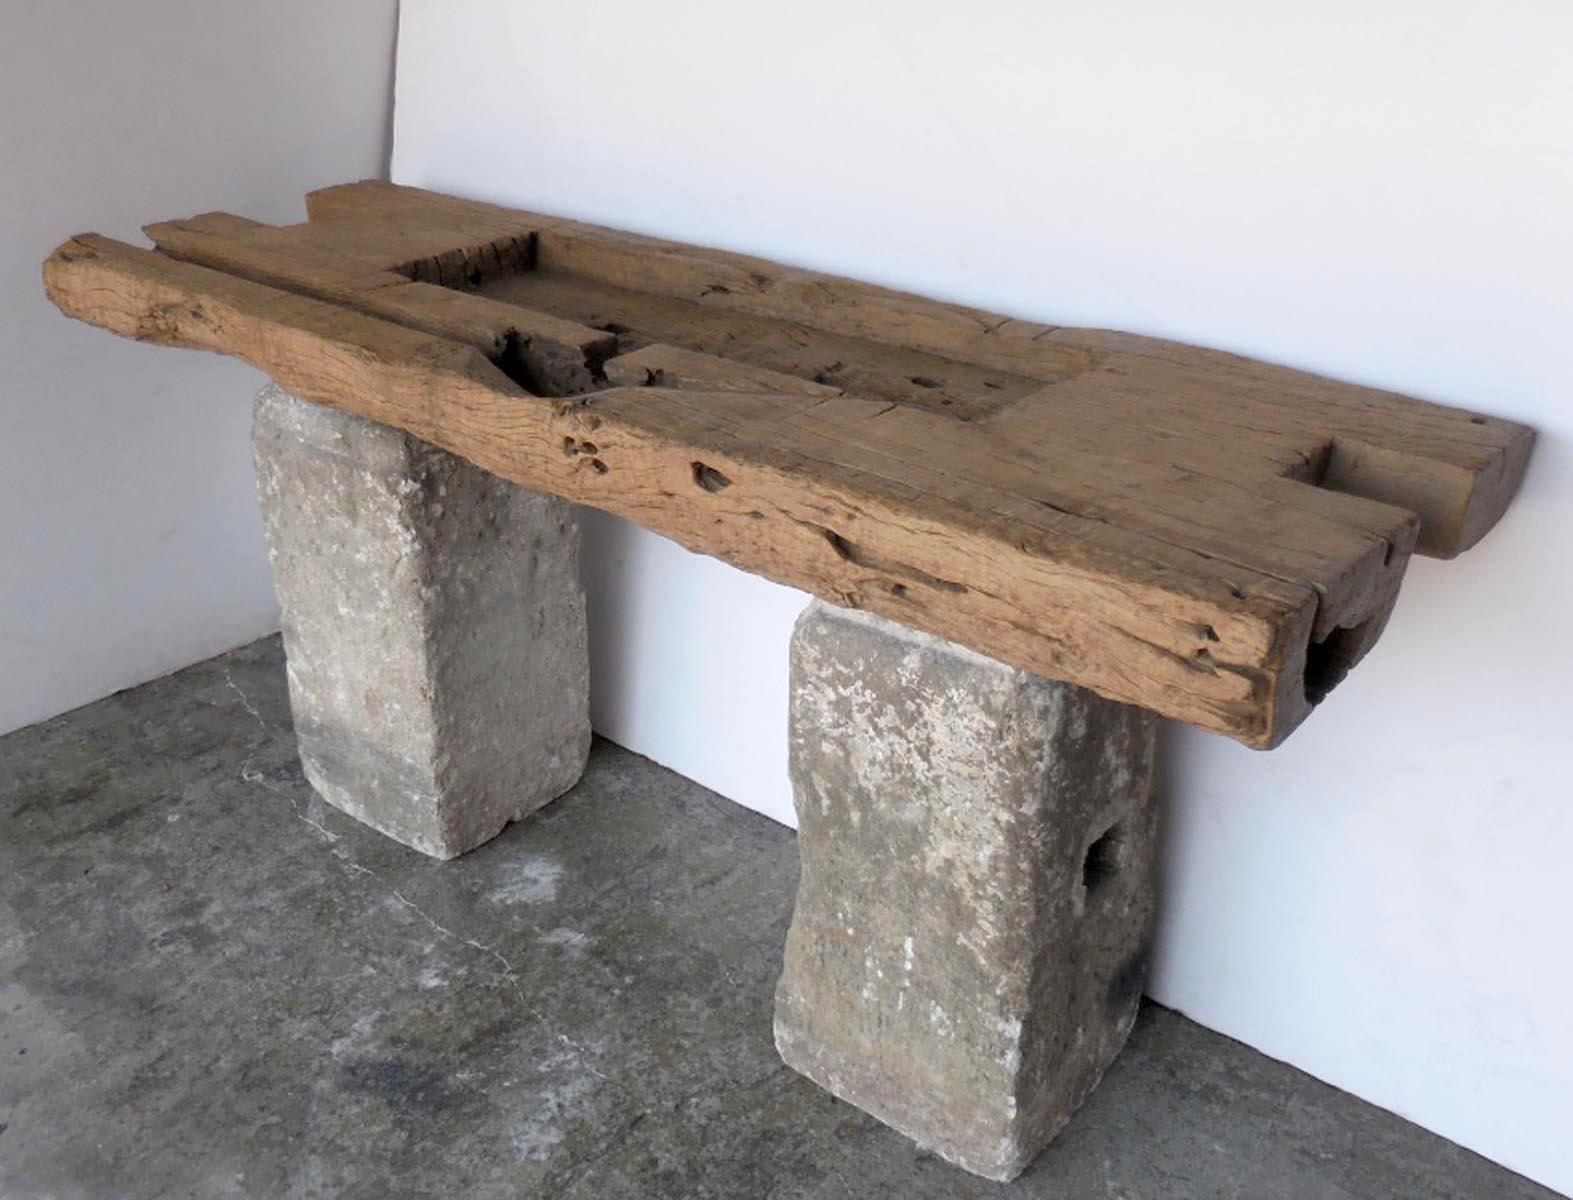 A very rustic, organic modern Japanese elm wood tray atop 19th century stone bases from Guatemala. A perfect marriage! Great patina on all pieces.